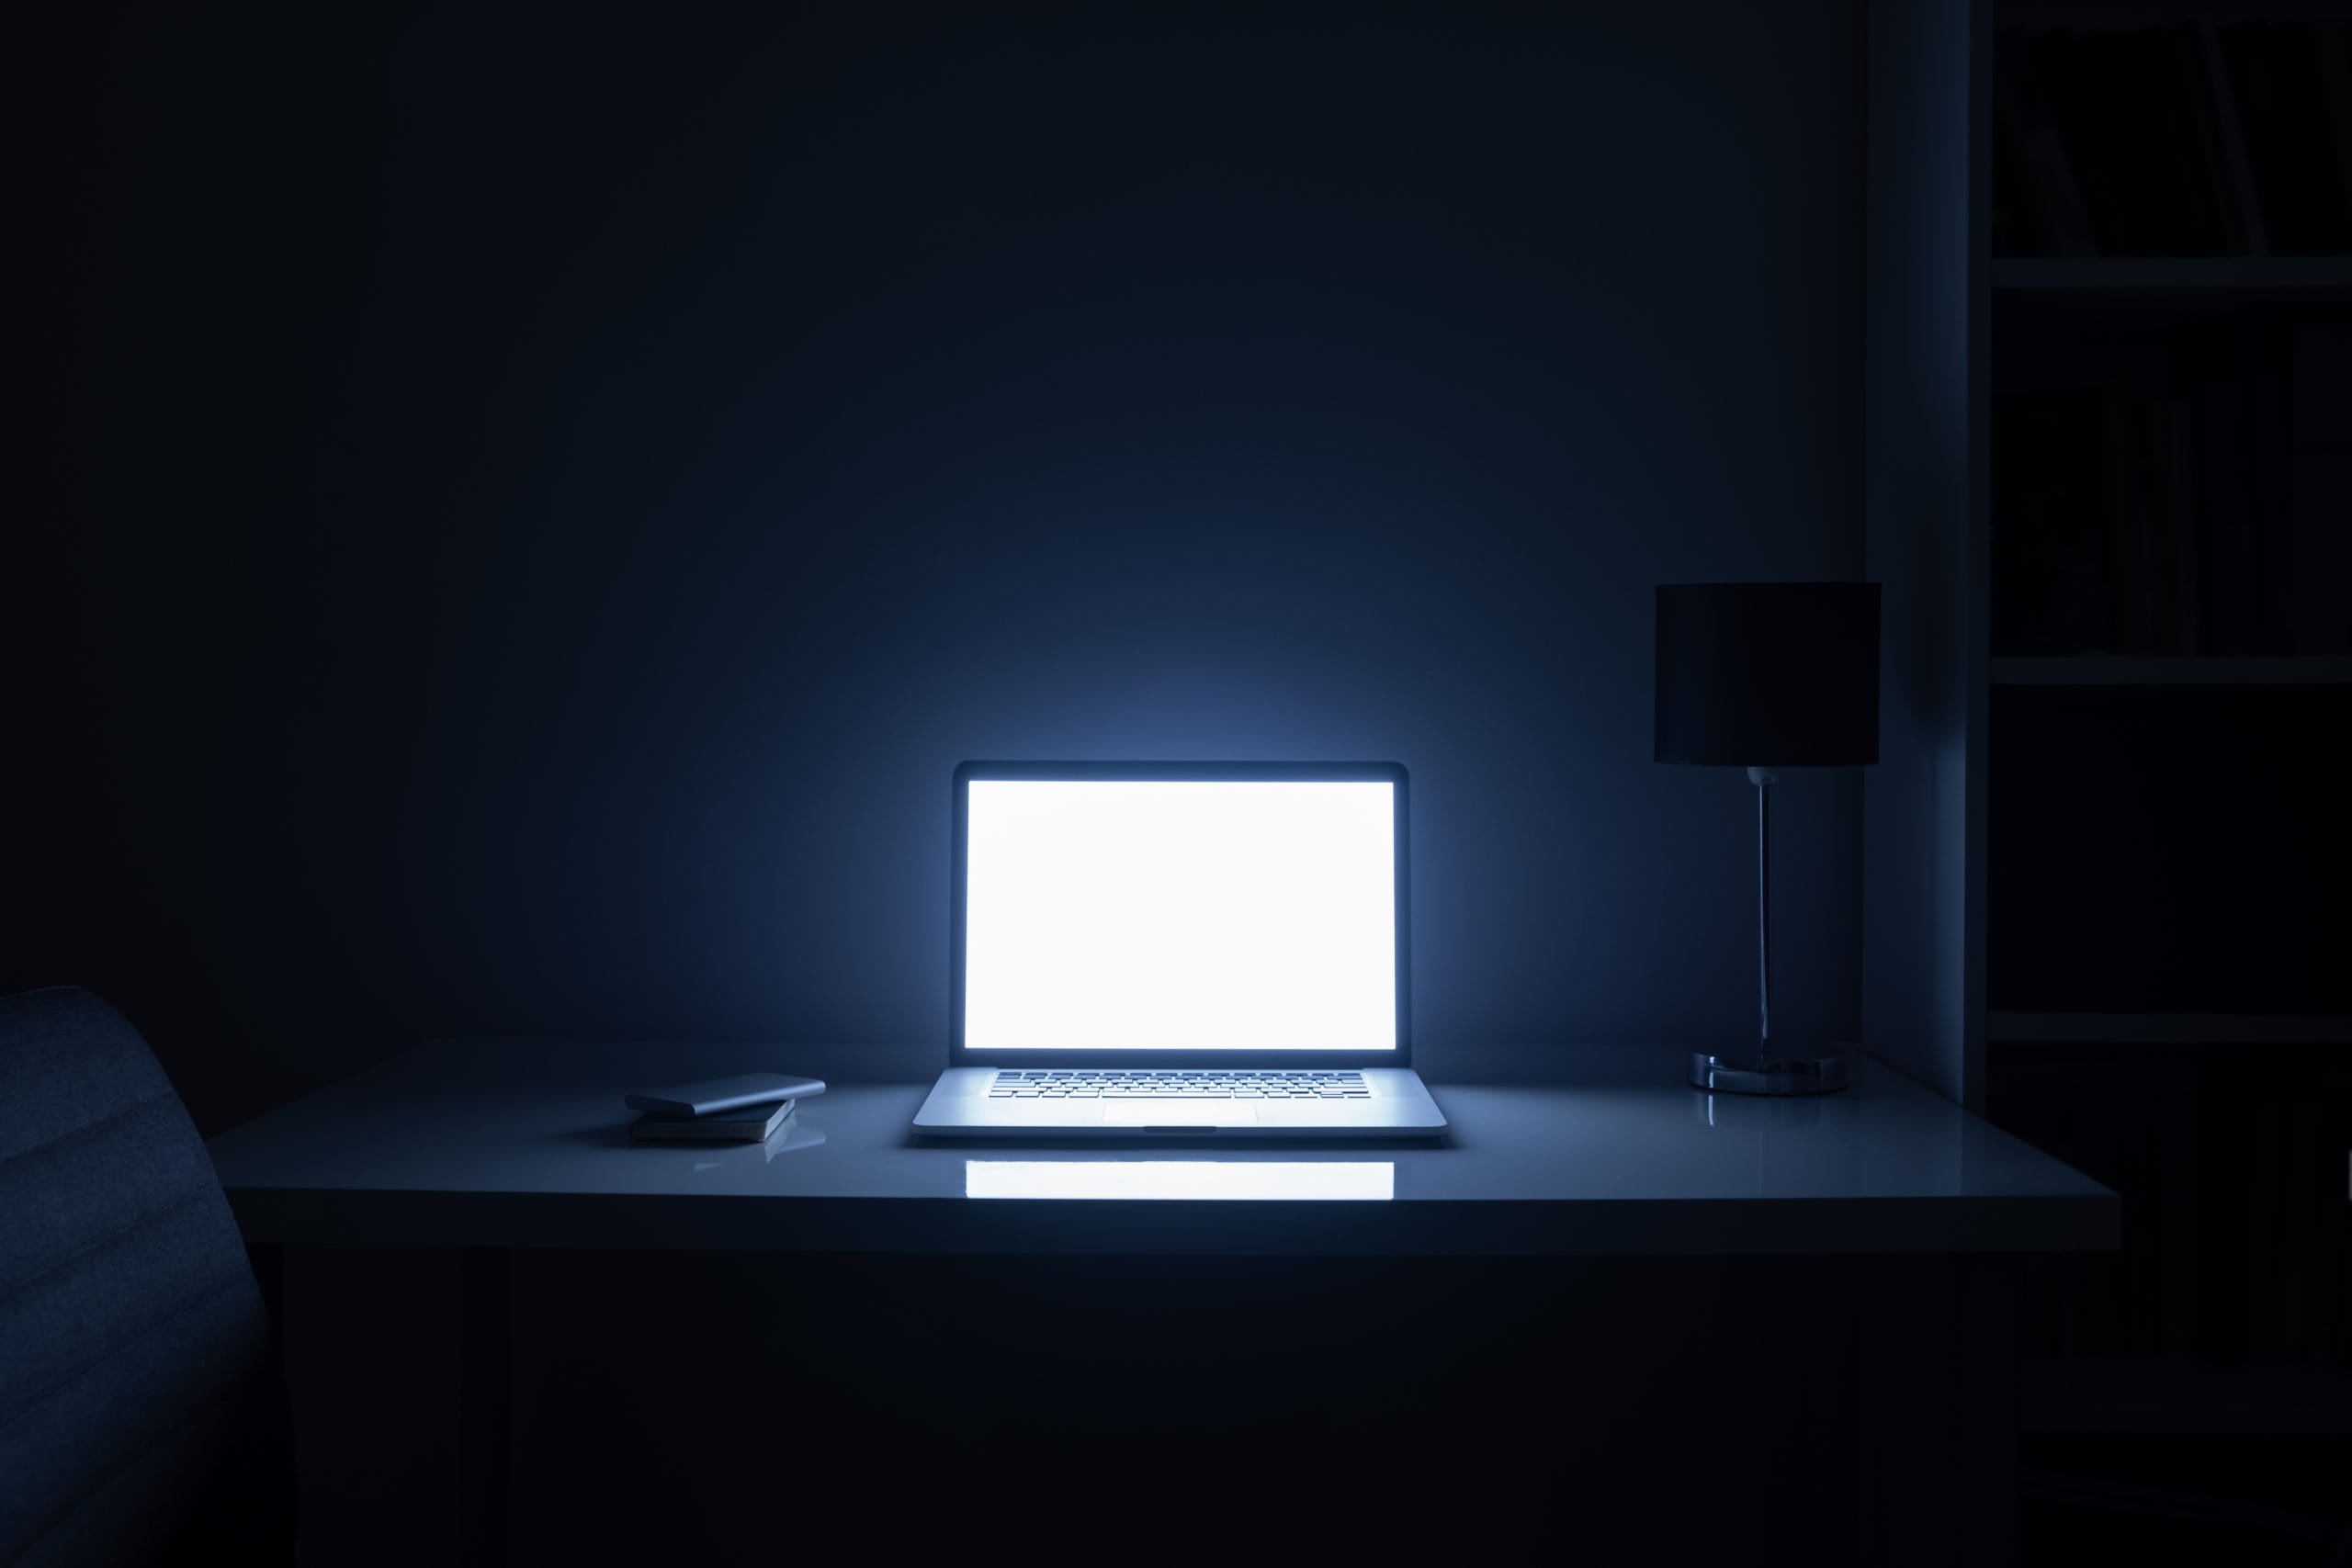 A laptop open with a blank white screen illuminating a dimly lit room, casting a blue glow over a minimalist workspace at night.